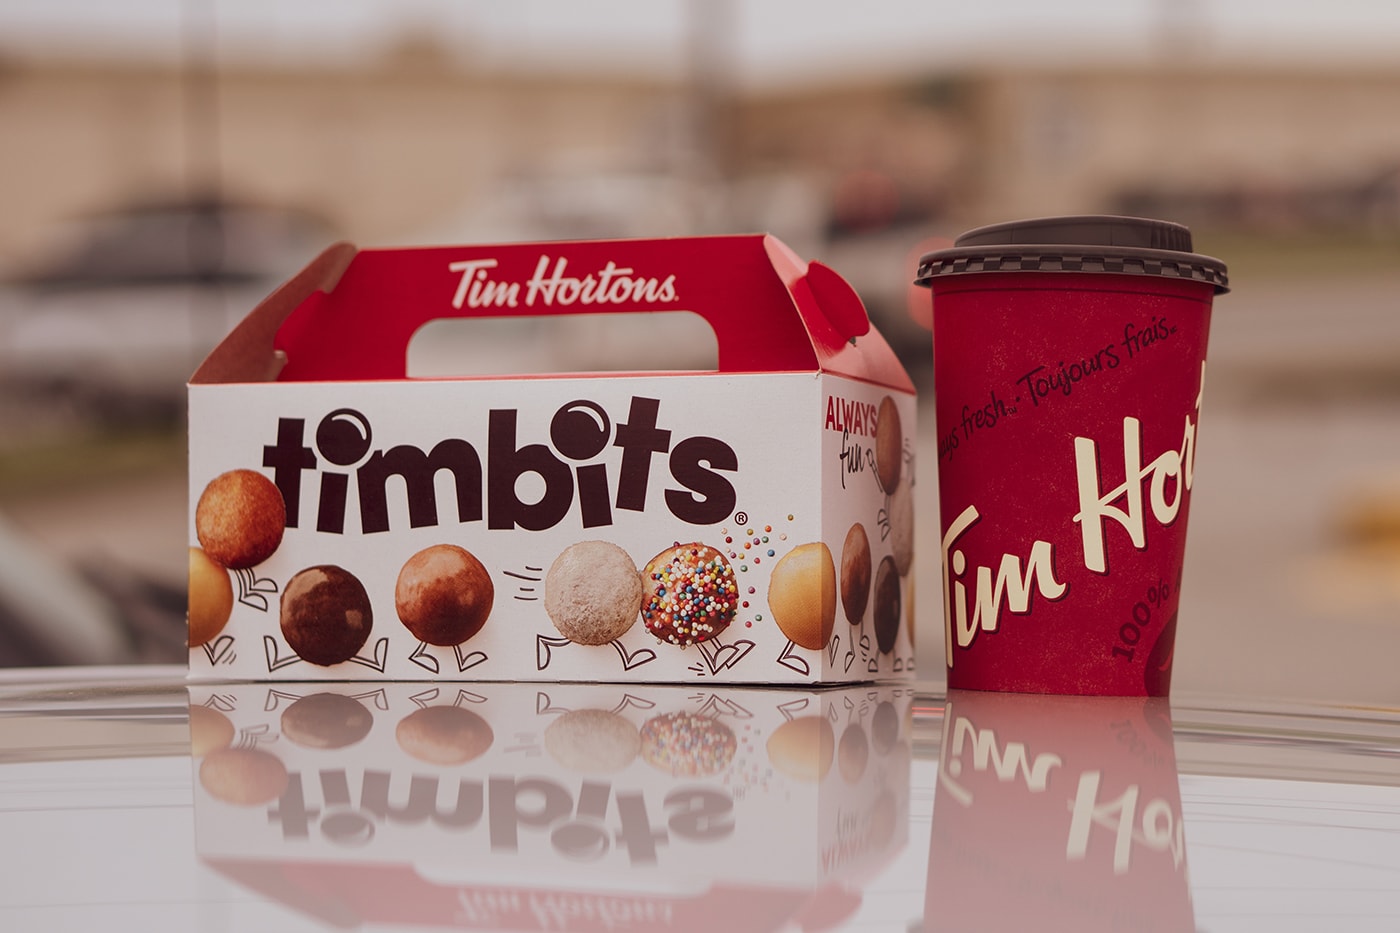 Tim Hortons Timbits Breakfast Cereal Info  donut cereal Donuts Doughnuts food cake double double 